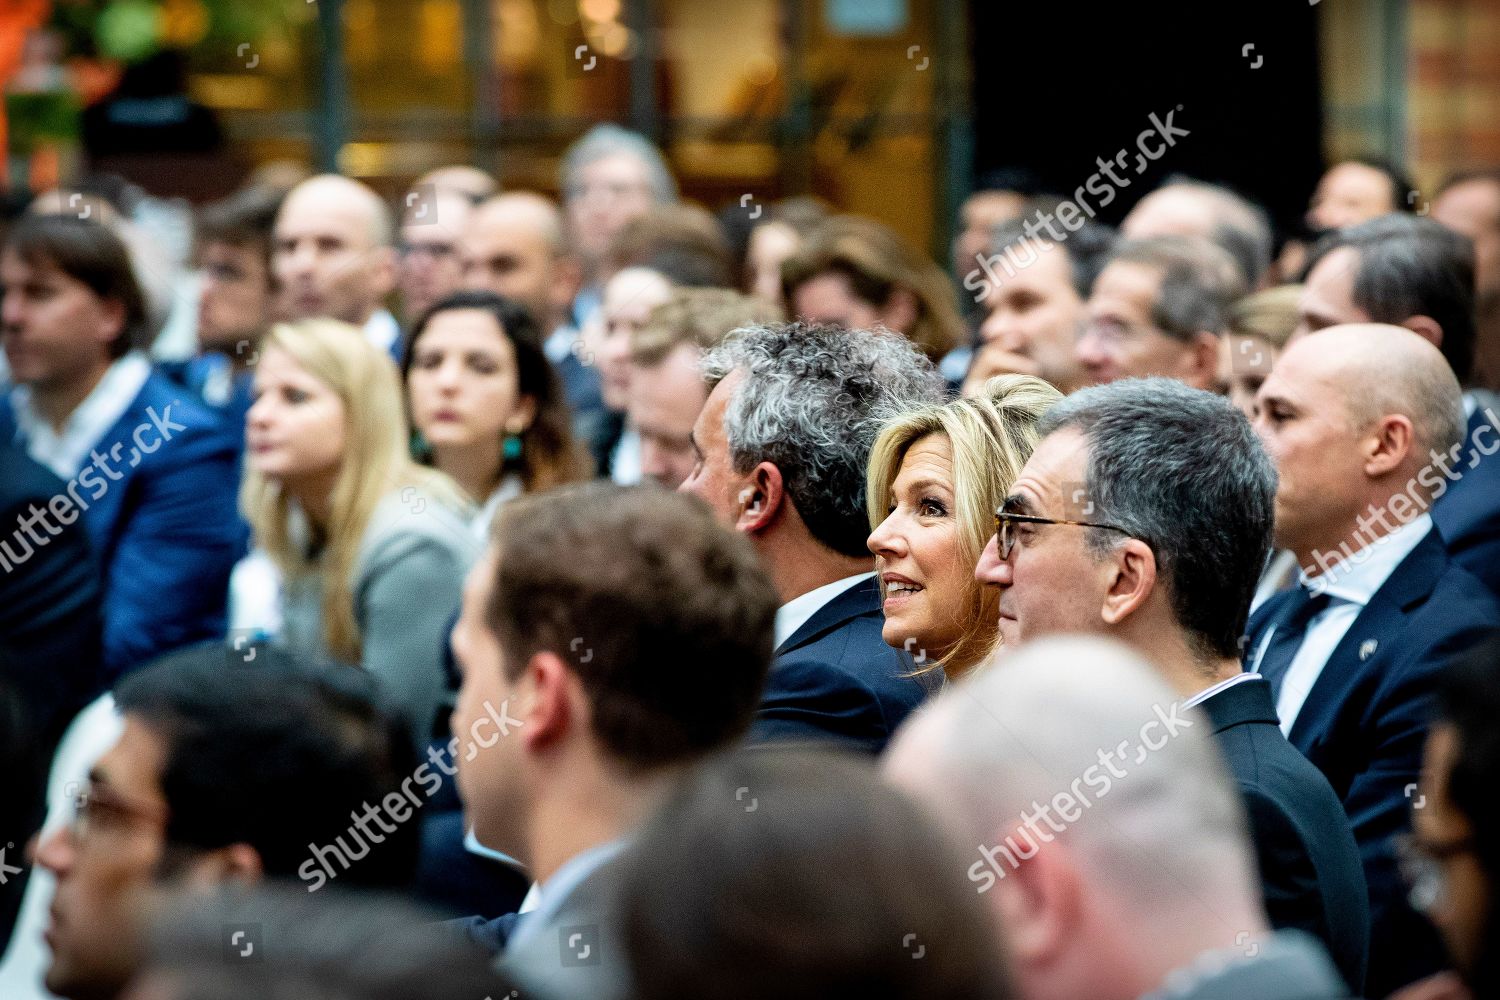 fintech-for-inclusion-conference-the-hague-netherlands-shutterstock-editorial-10098443u.jpg